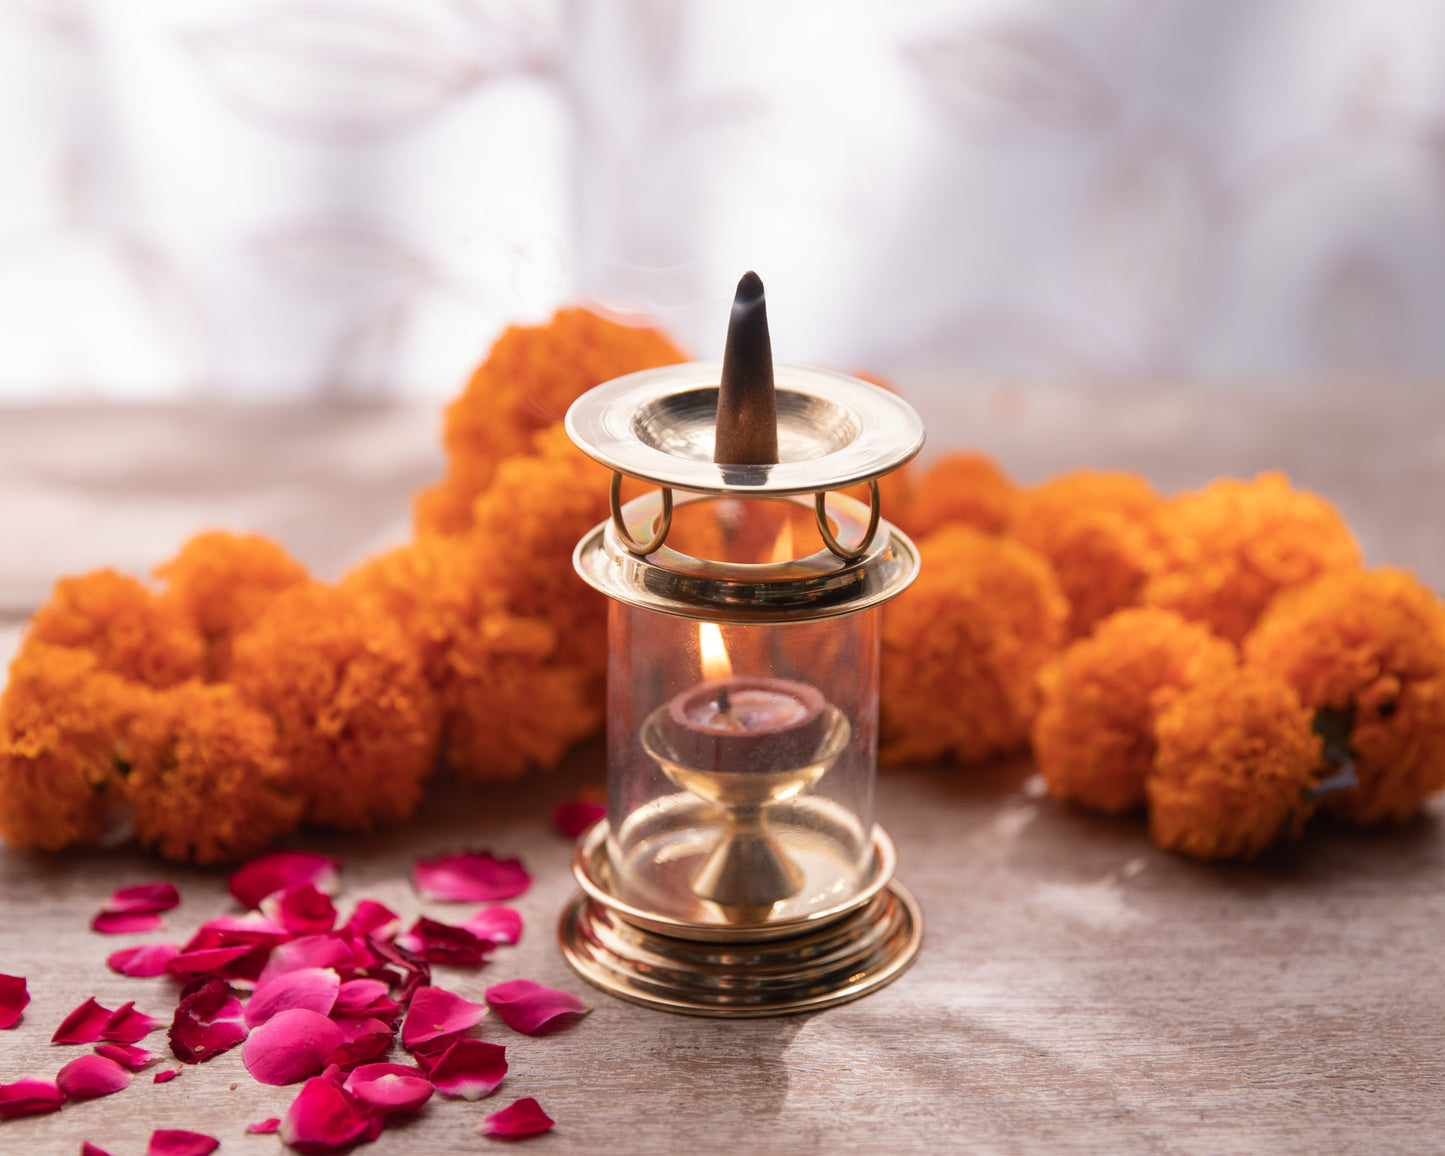 Our Akhand Diya with Dhoop Holder seamlessly combines the timeless tradition of a continuous flame diya with a dedicated space for burning dhoop (incense cones or resin) simultaneously.